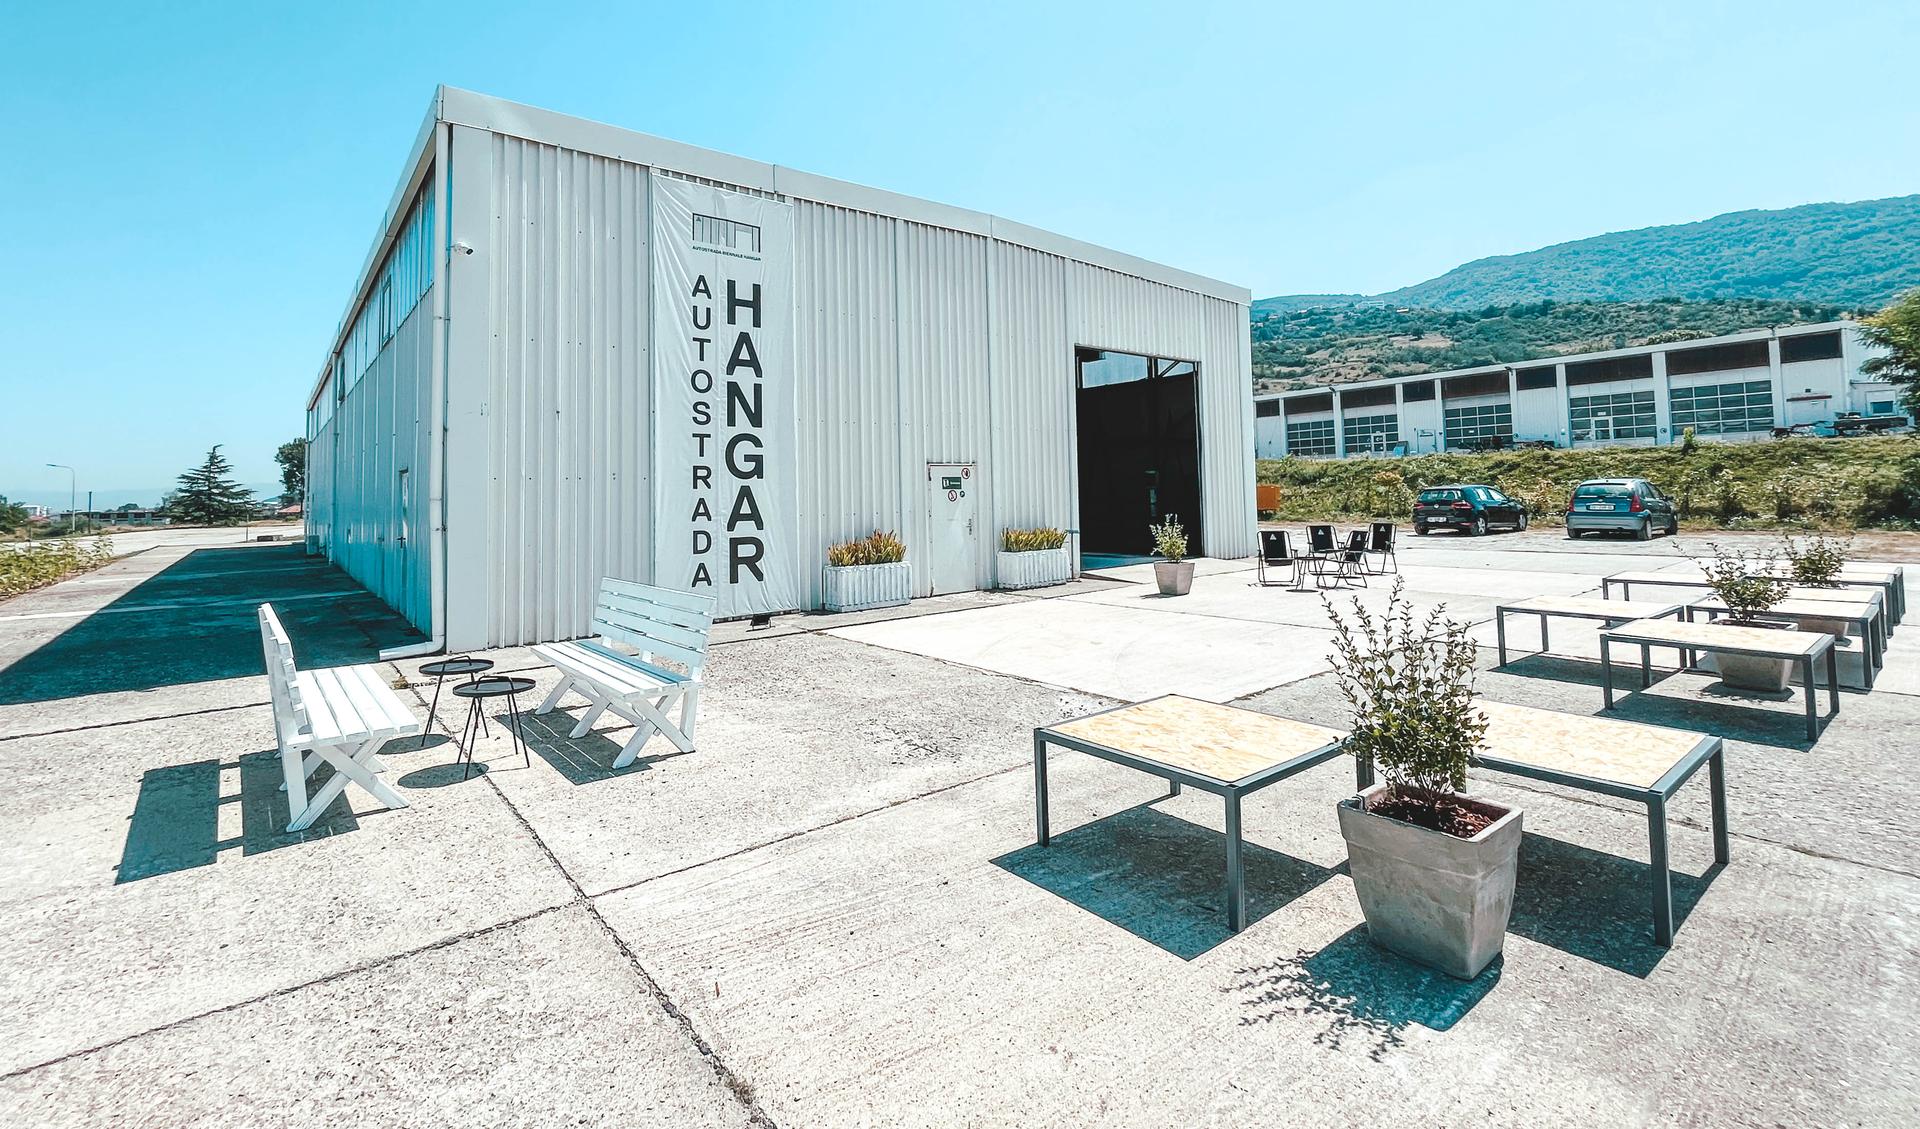 The hangar of Autostrada biennale. In fron you see an open air meeting spot with tables and benchesr 